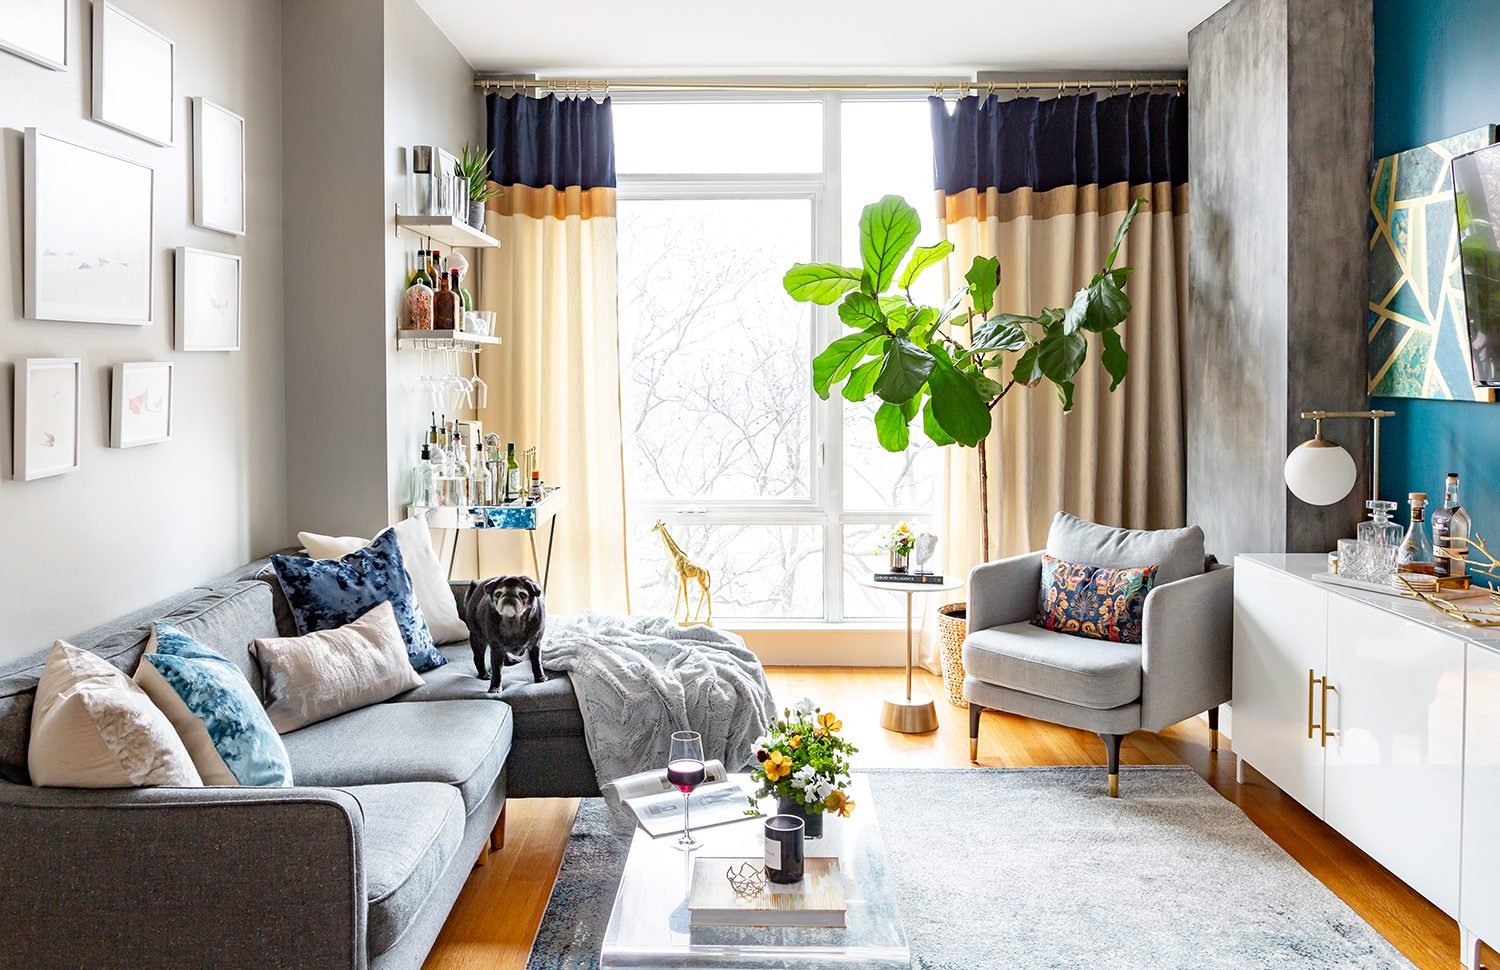 7 Apartment Design Ideas to Maximize Limited Space, Havenly